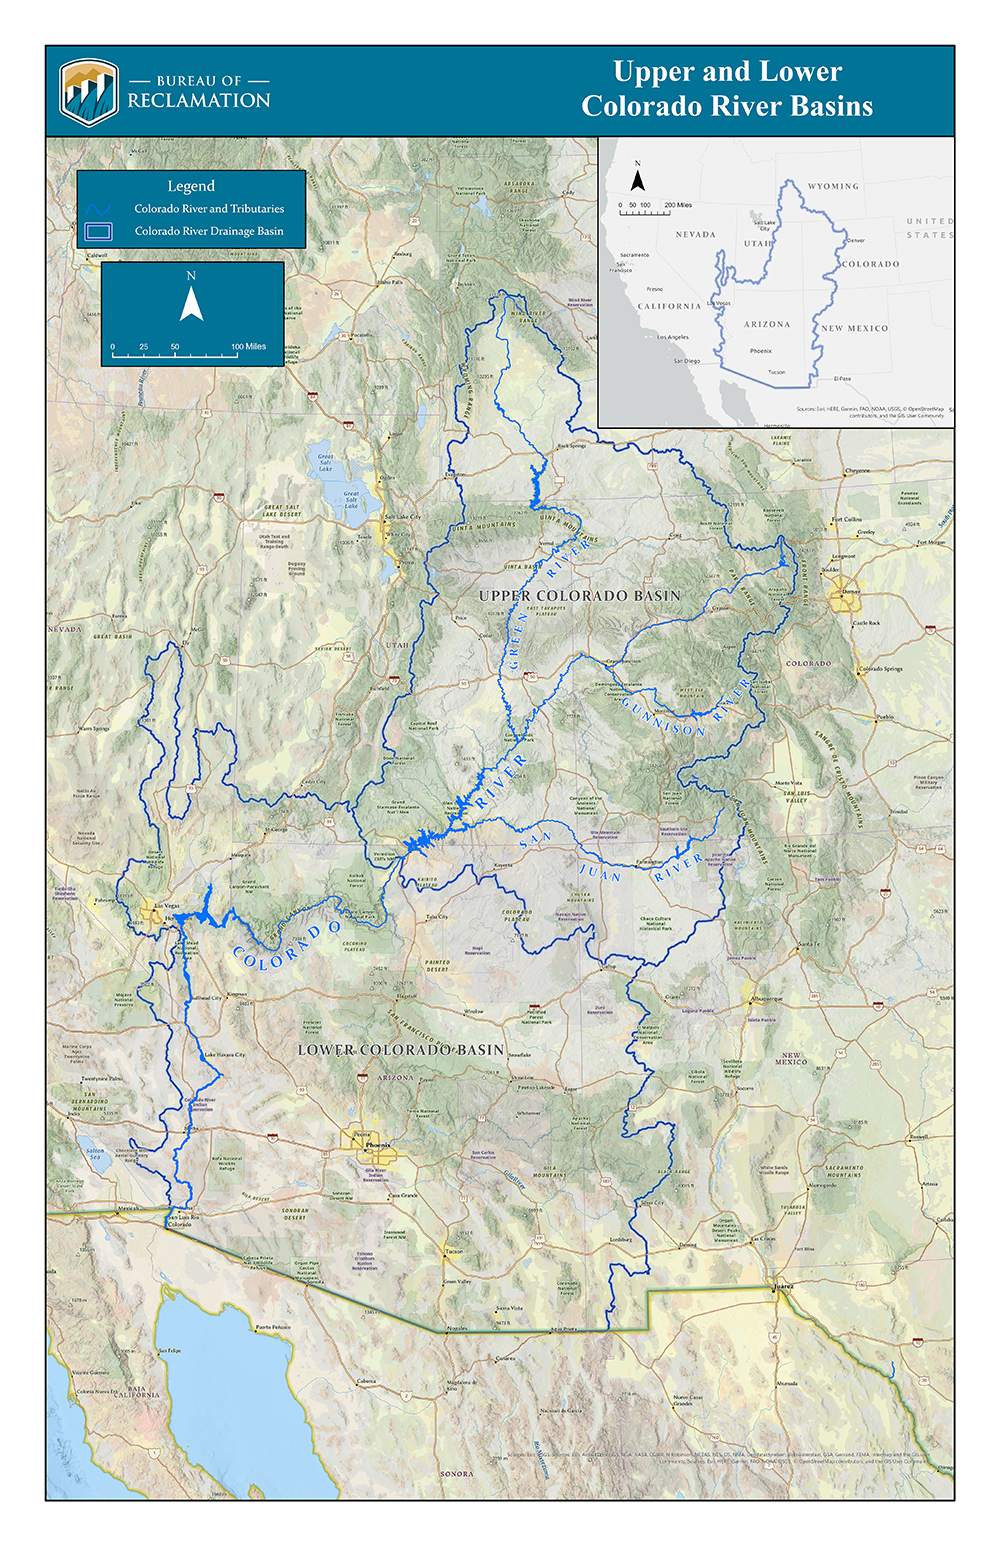 A map of the Colorado River Basin showing both the upper and lower basins.